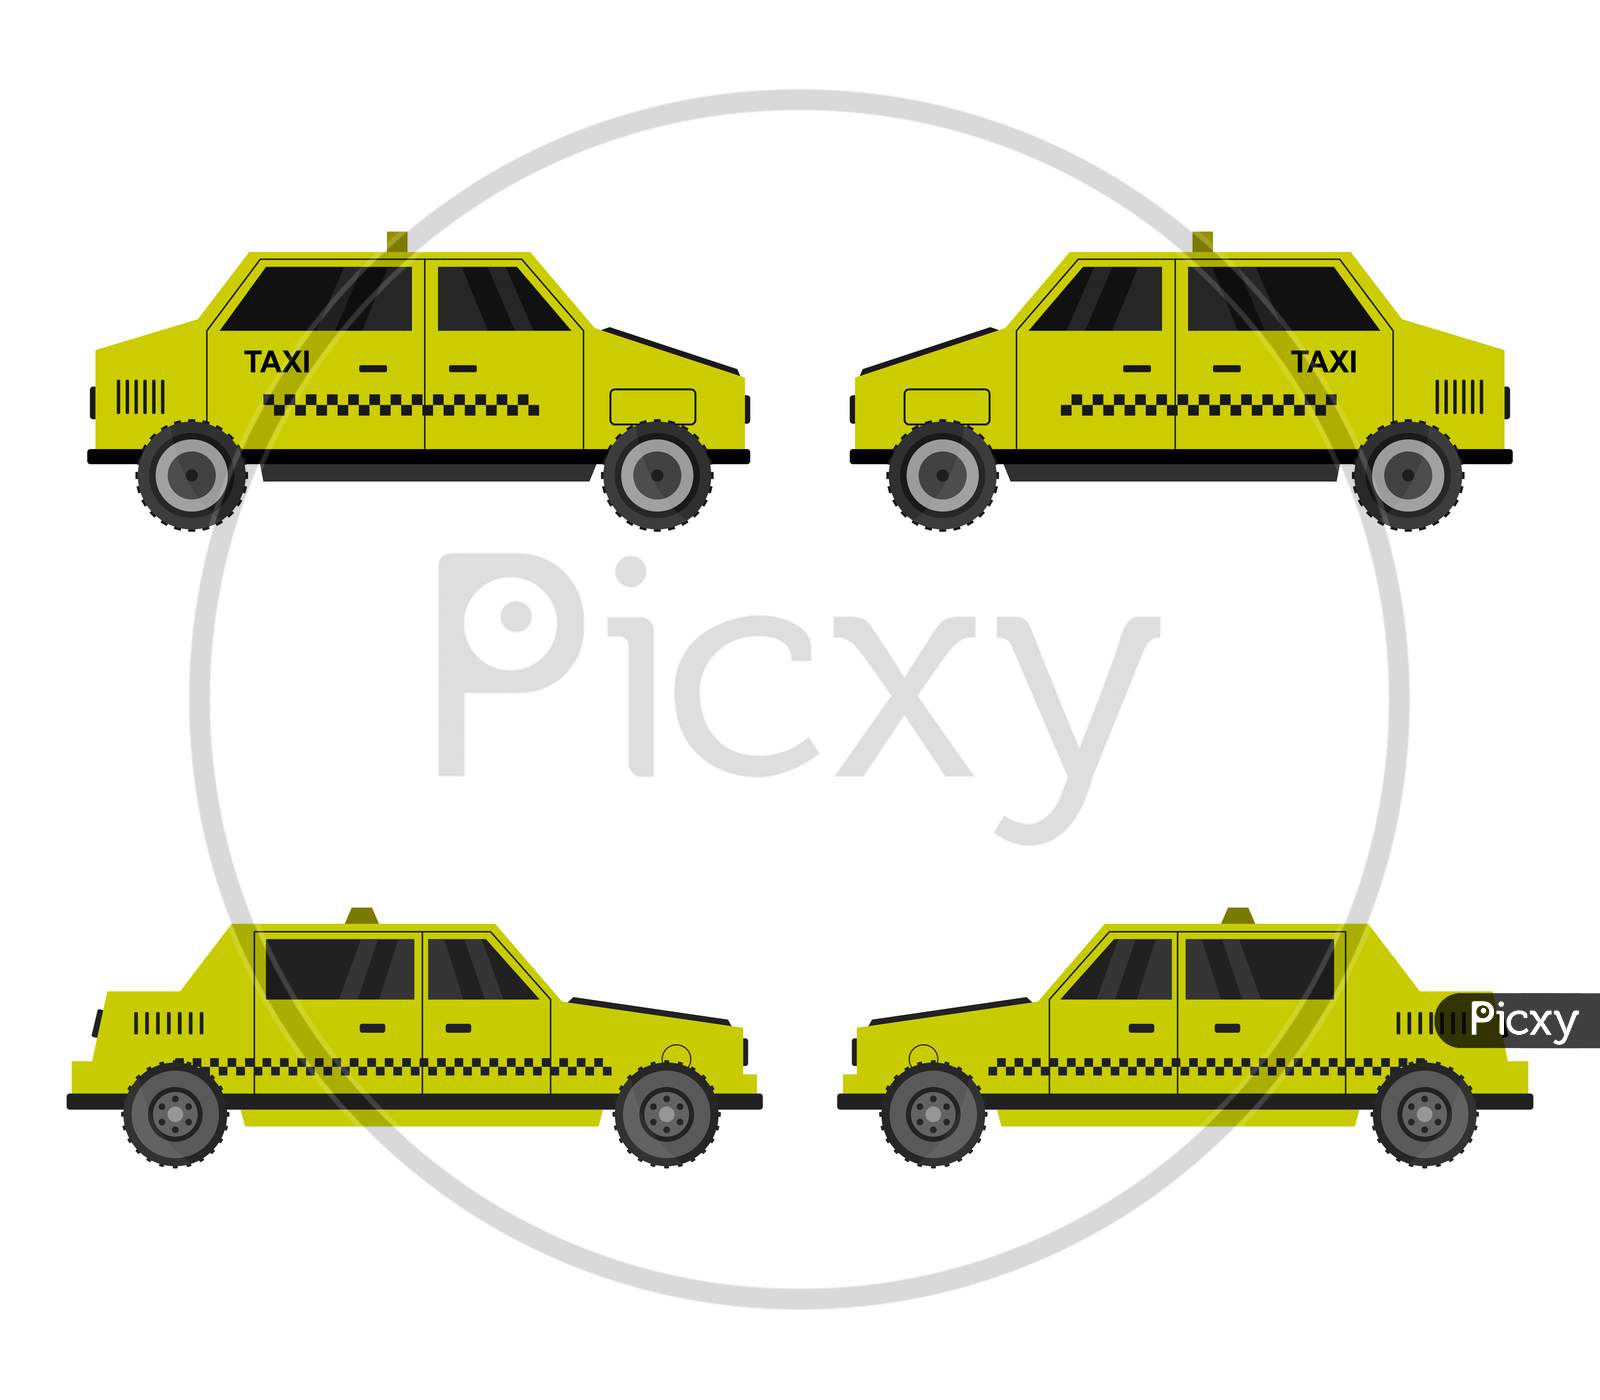 Taxi Illustrated In Vector On A White Background